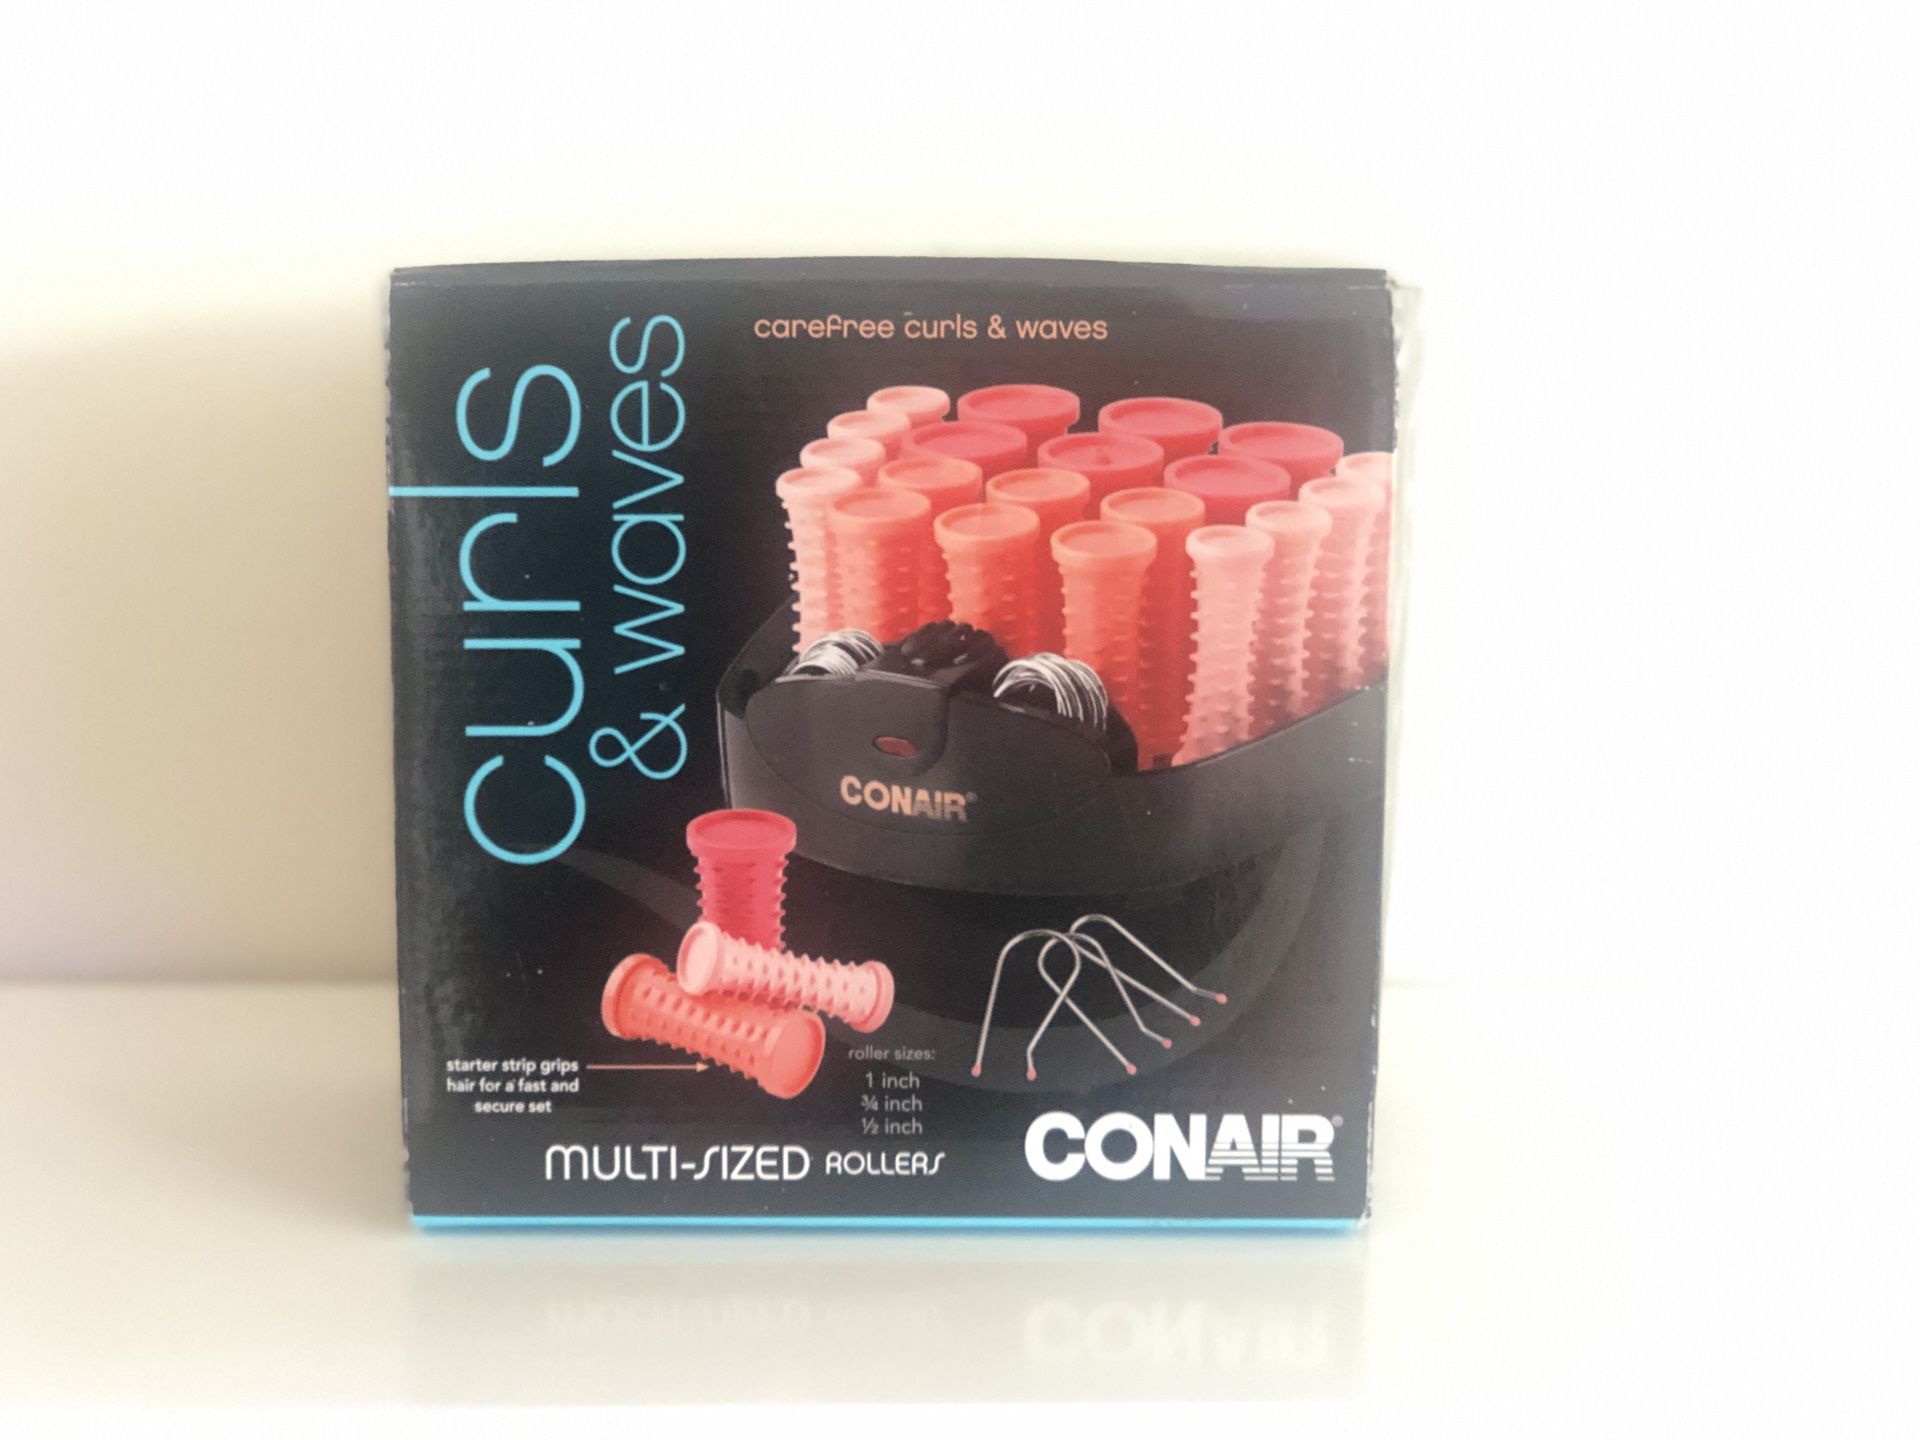 Conair curls and waves hot rollers